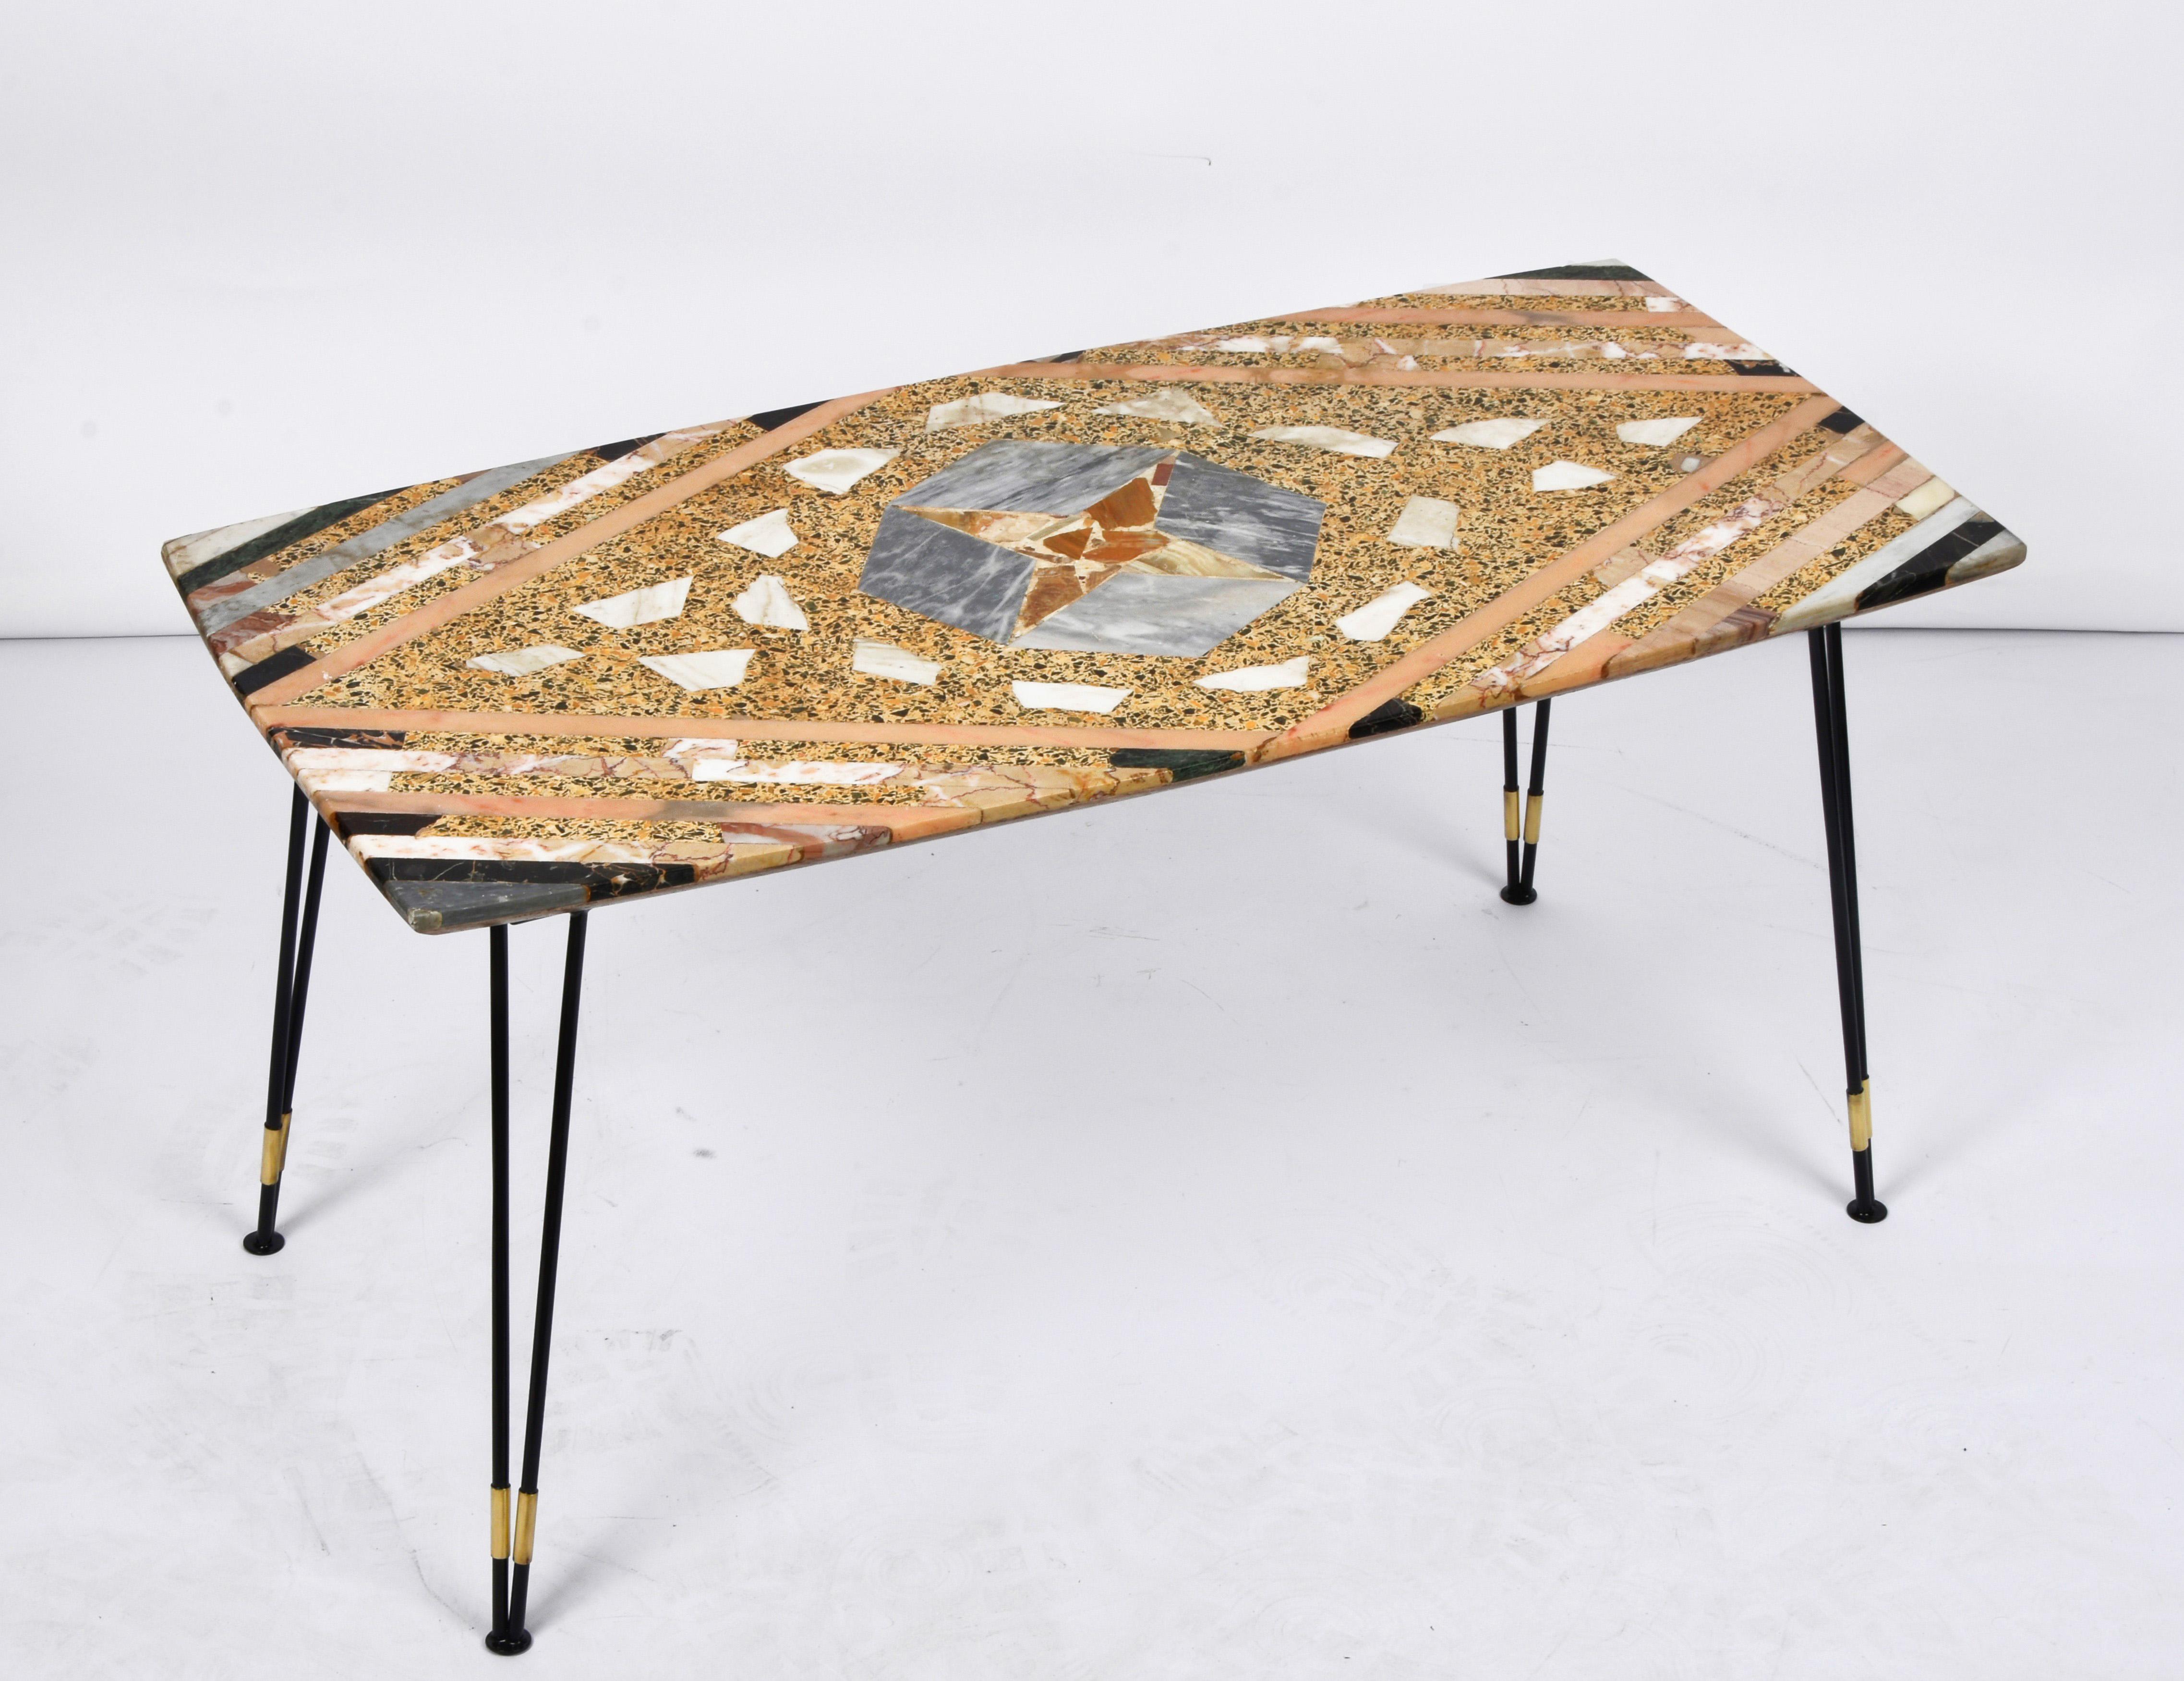 Incredible and unique midcentury inlaid marble coffee table with black metal lacquered base and stunning brass finishes. This amazing piece was produced in Italy during the 1950s.

This piece is unique because of the classic 1950s Italian design